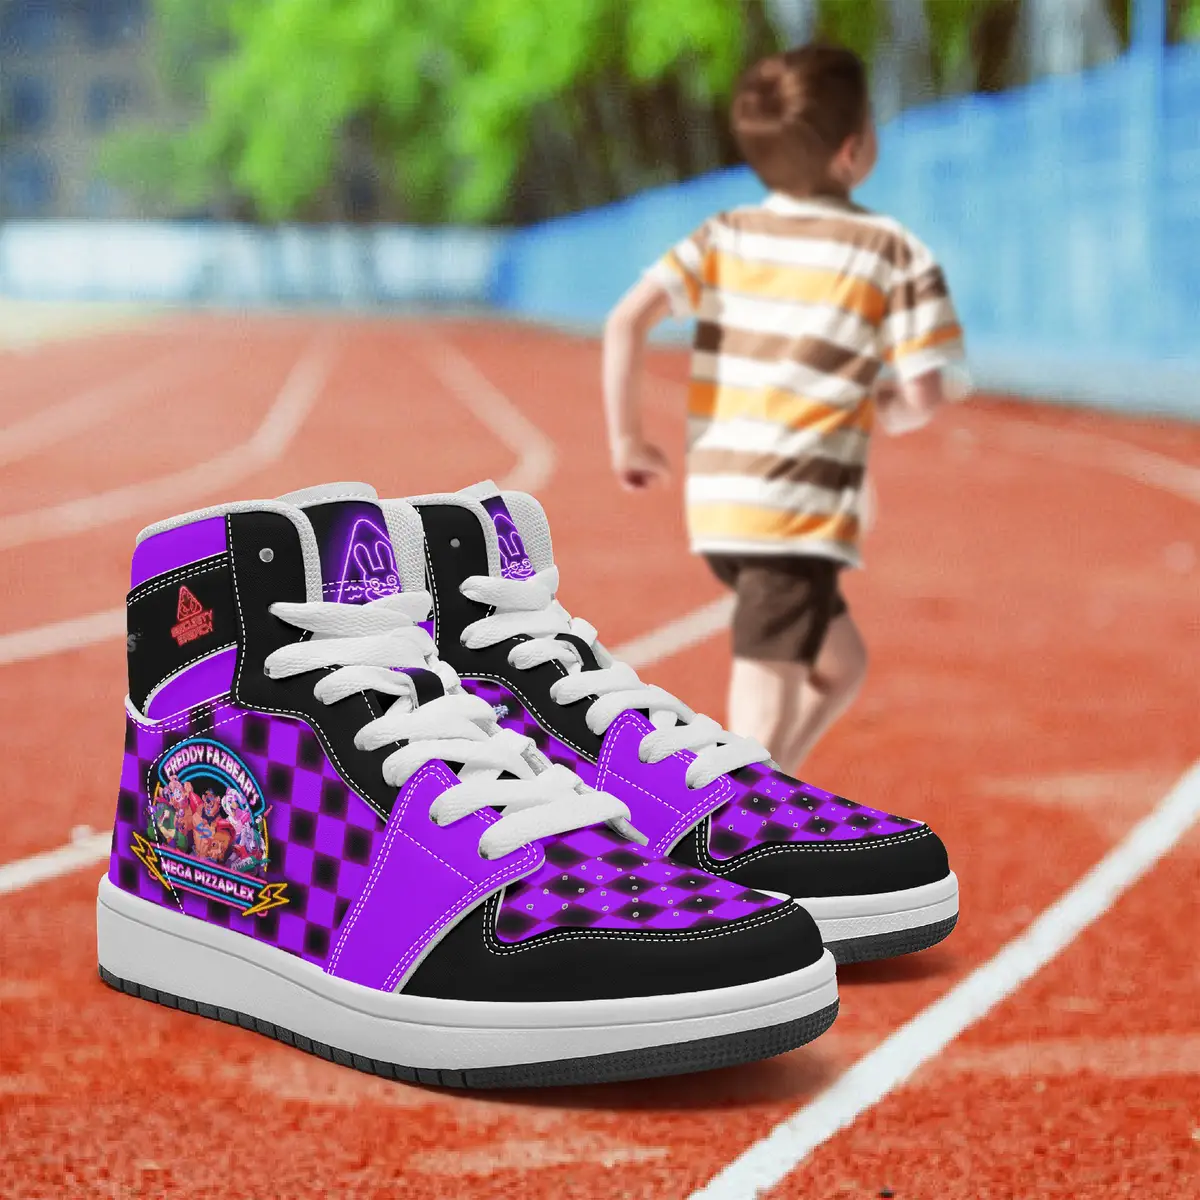 Five Nights at Freddy’s Security Breach Character High-Top Leather Black and Purple Shoes FNAF, 5NAF Cool Kiddo 28